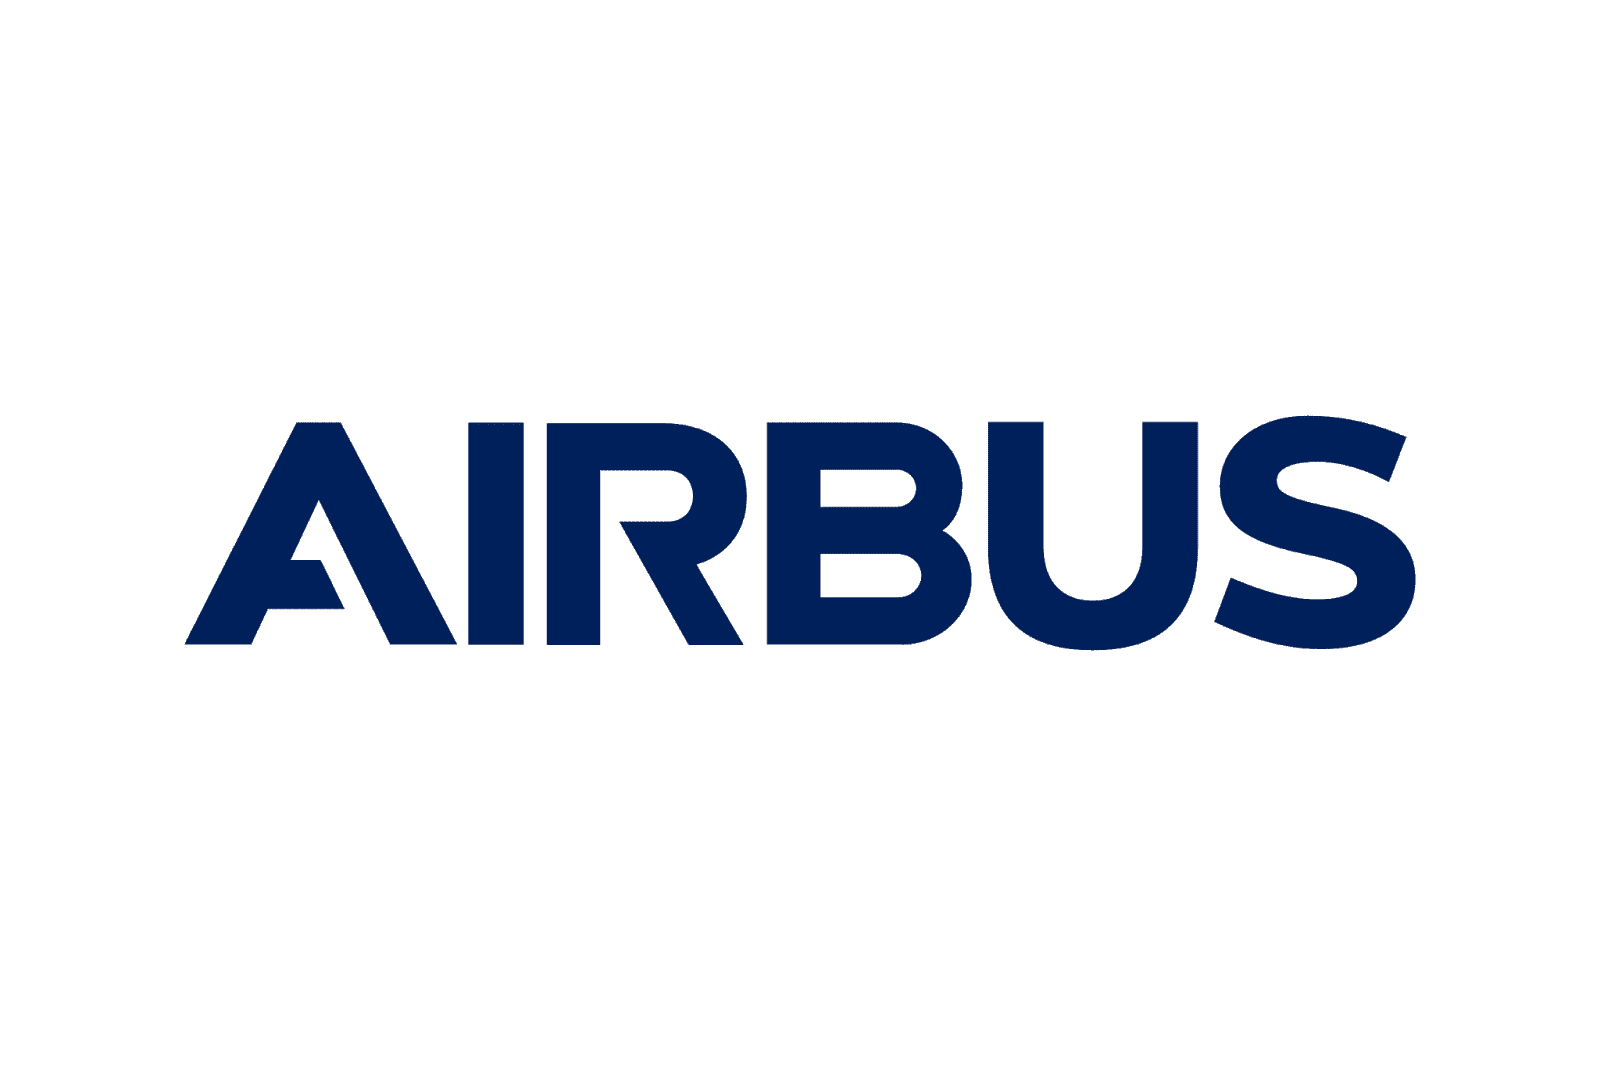 https://edpa.org/wp-content/uploads/2022/06/Airbus.png